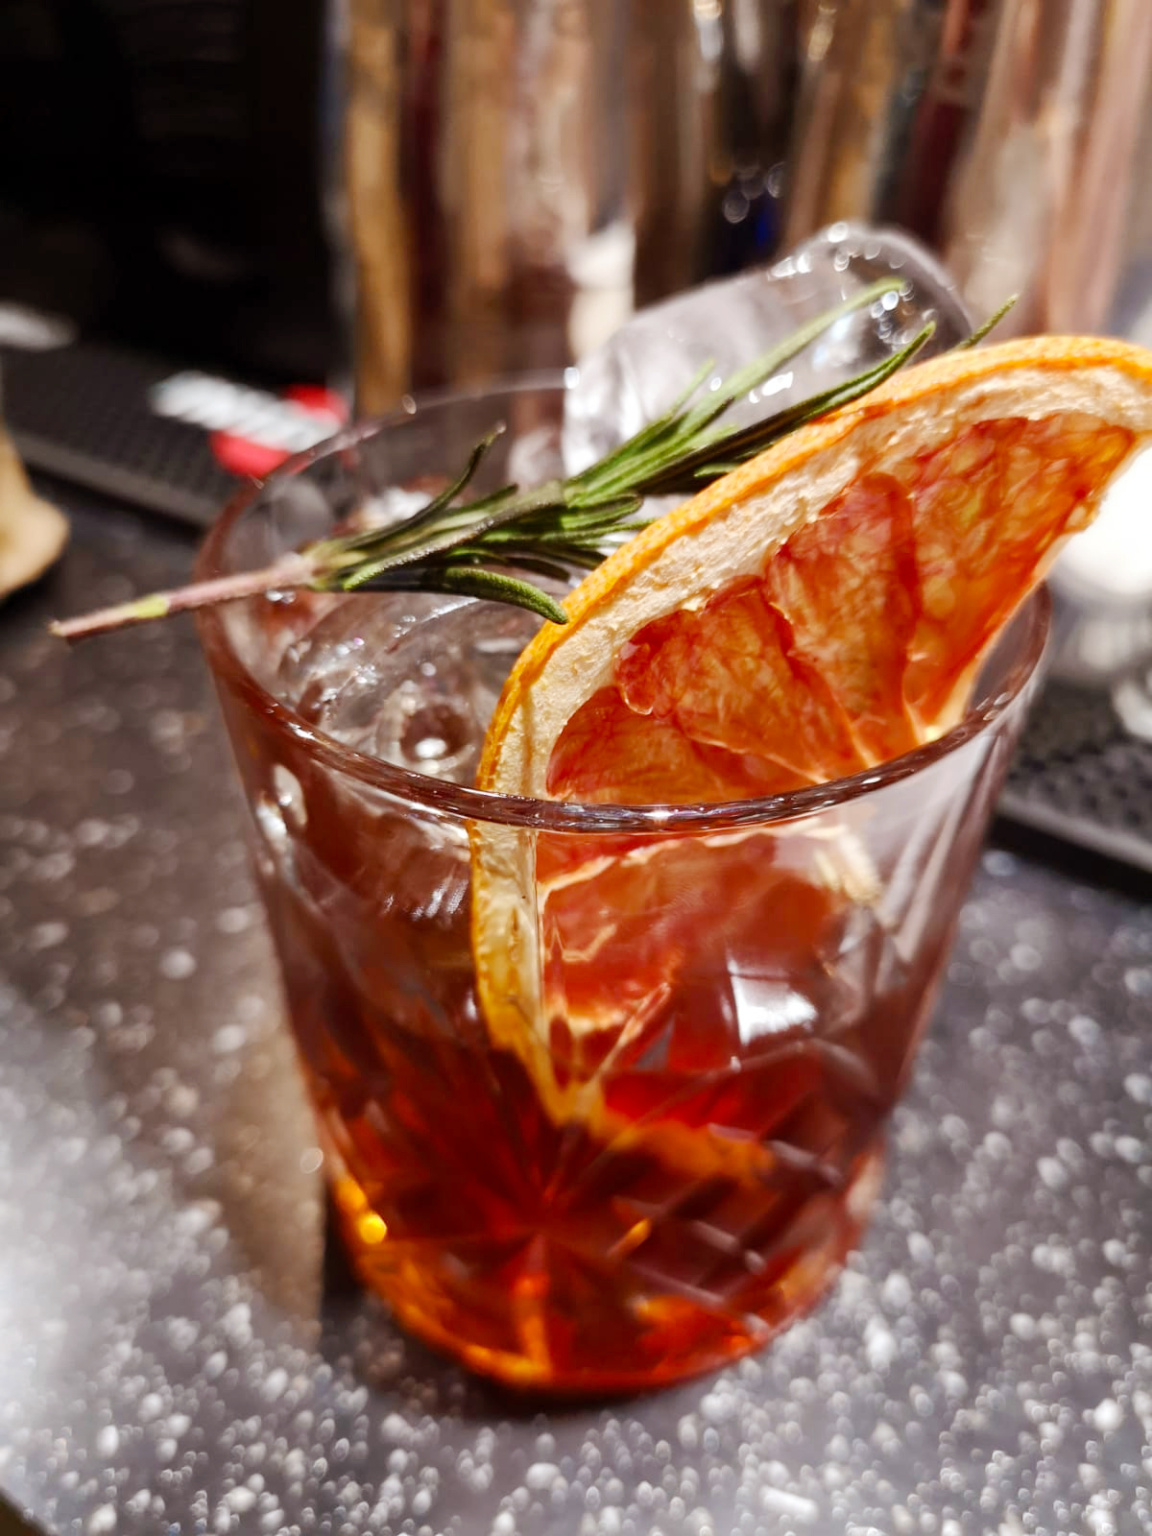 Food Photography - Old Fashioned Cocktail